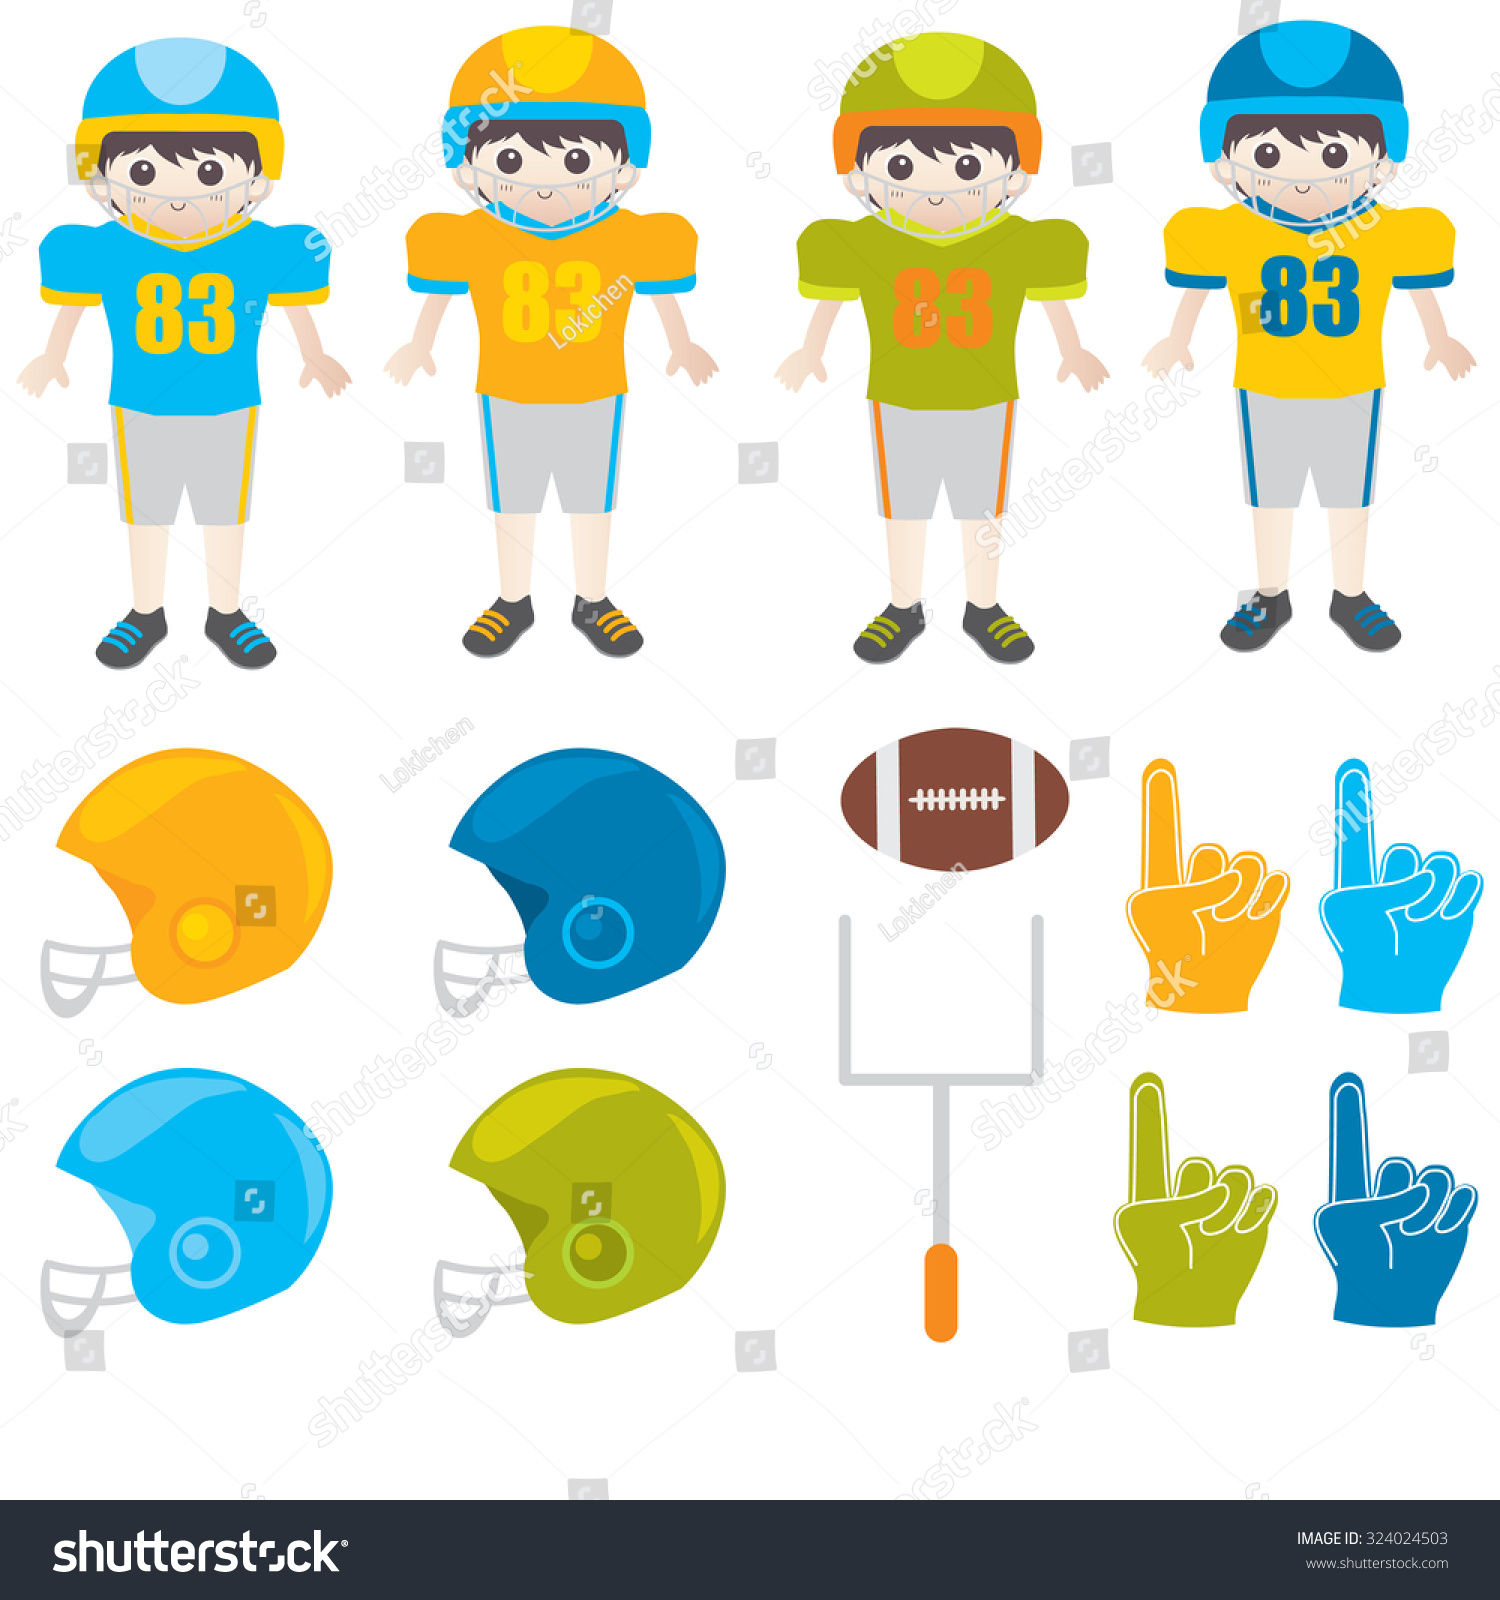 Vector Football Icons Collection - 324024503 : Shutterstock